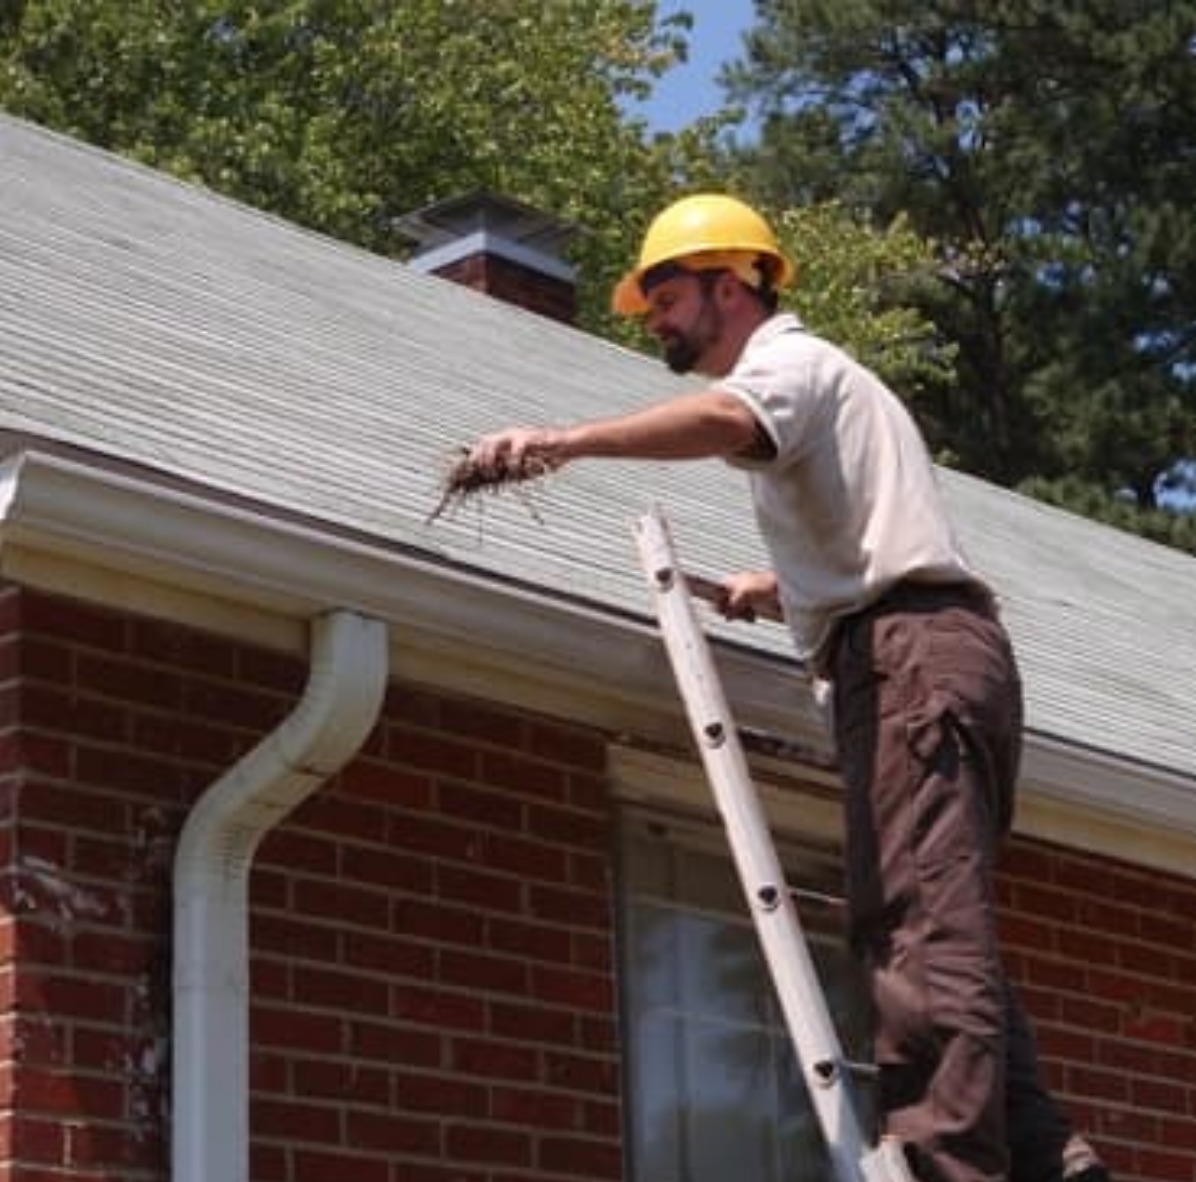 Lewisboro NY Gutter Cleaning Company